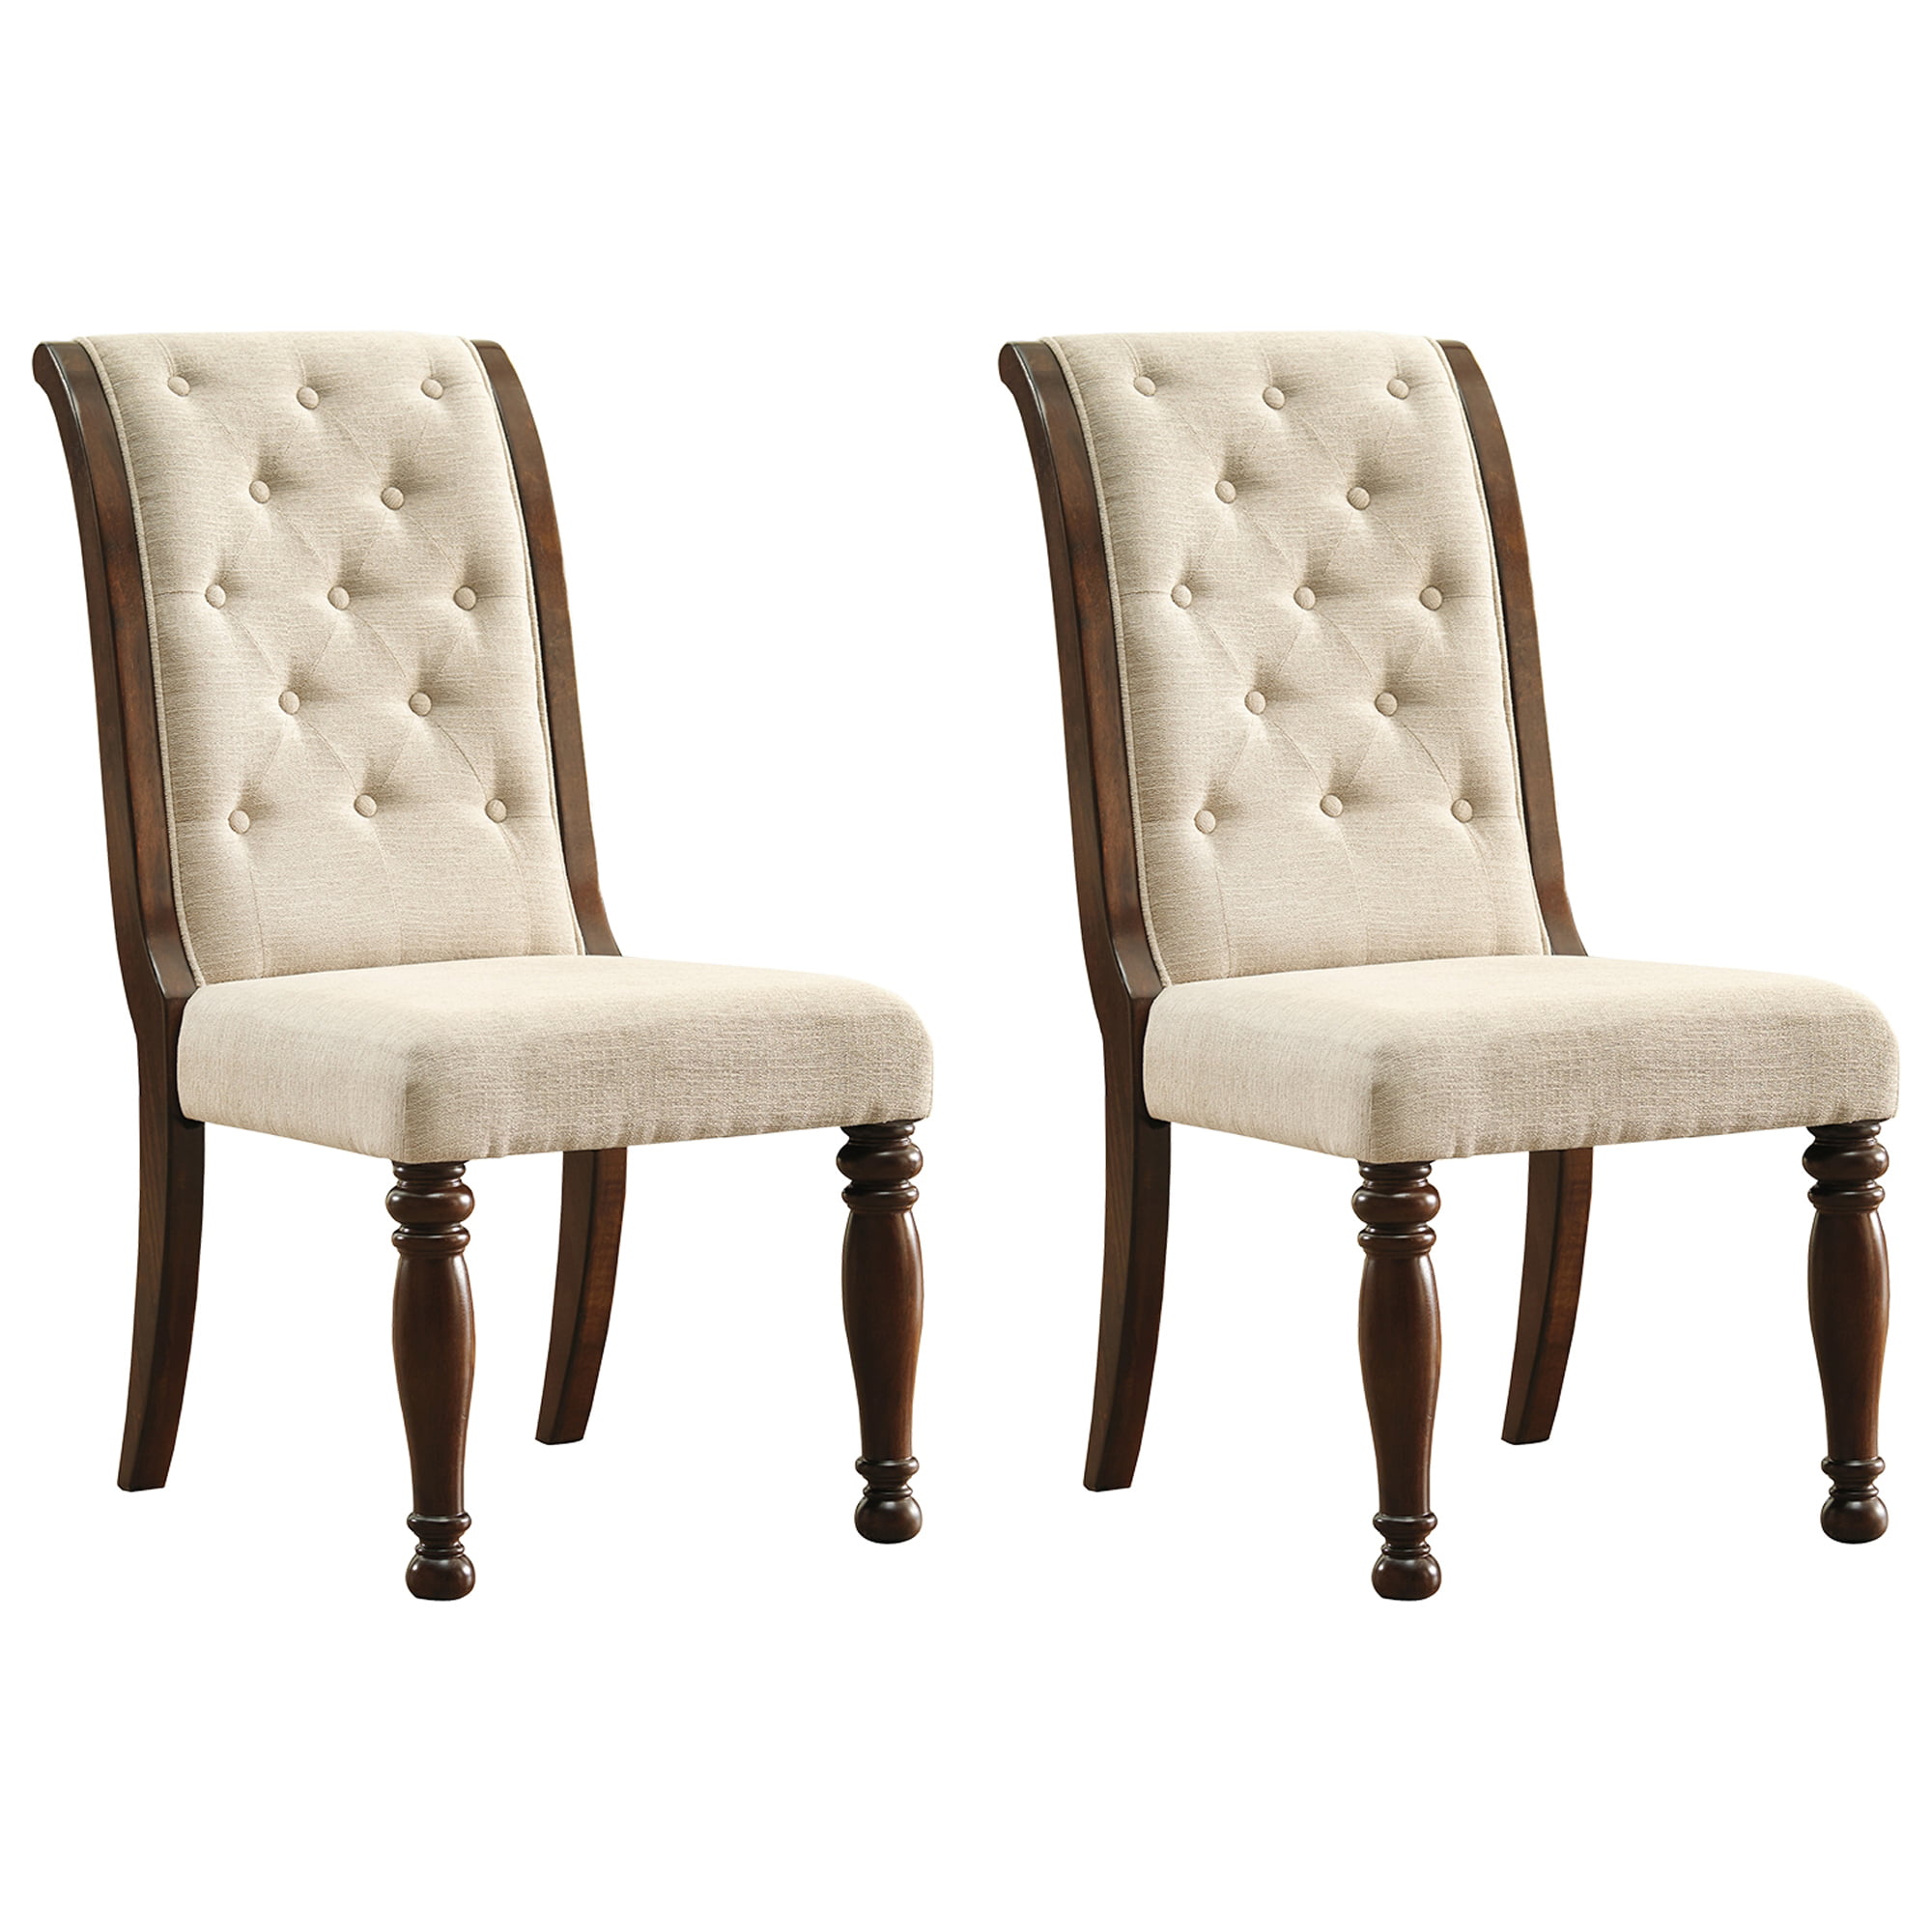 Signature Design By Ashley Porter Dining Side Chair Set Of 2 Rustic